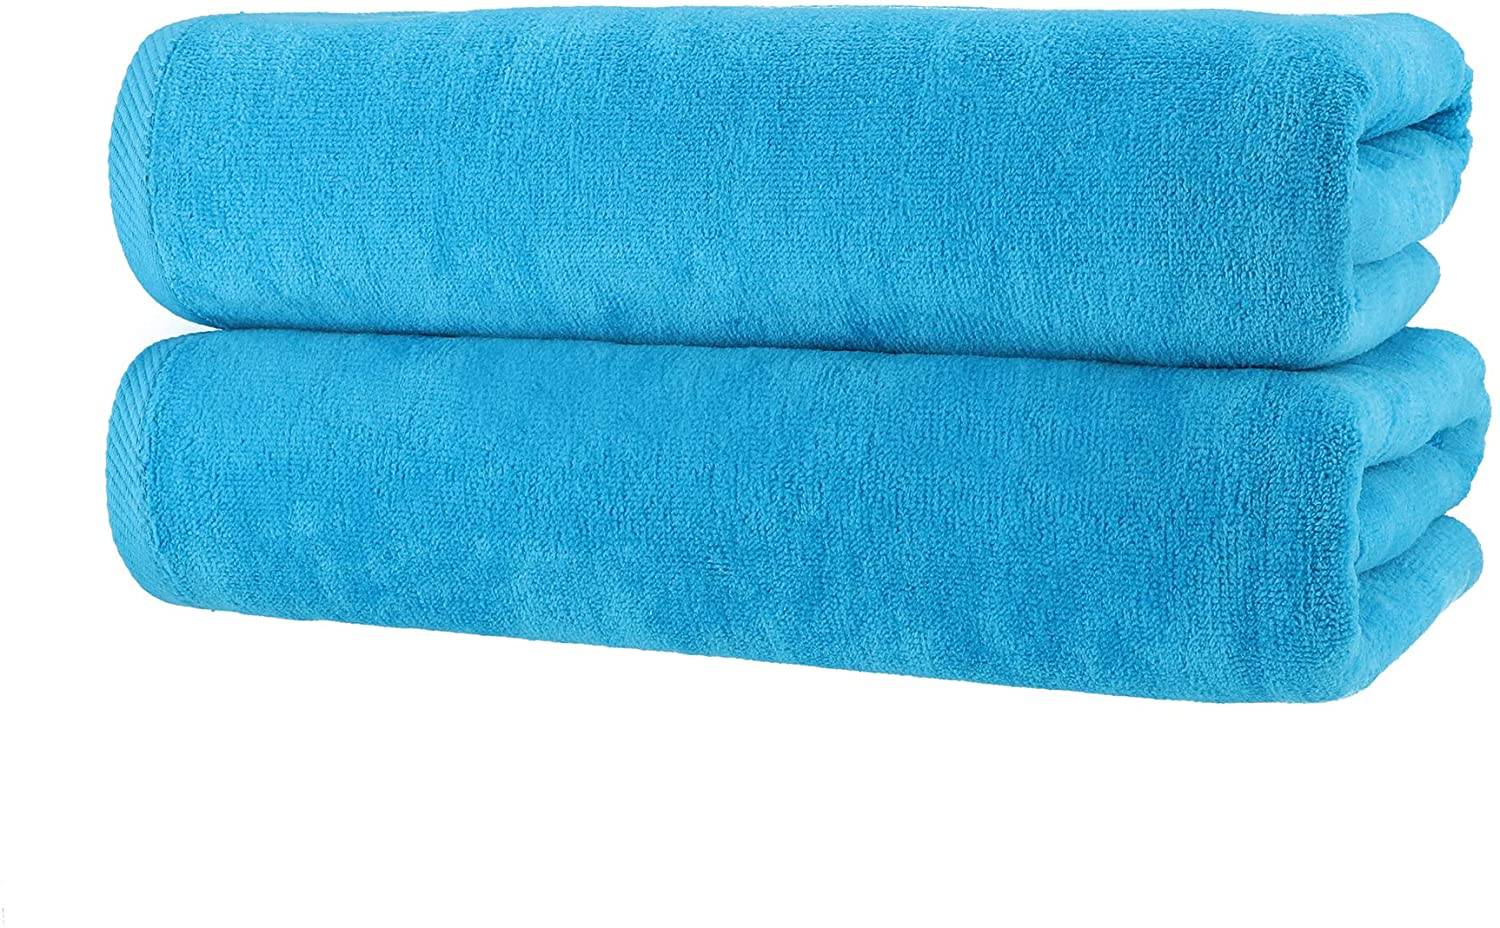 100% Original Factory Velour Emboridery Towel - Royal Comfort and soft Solid Color Velour Terry Beach Towel with bright colors, made of 100% cotton.  – SUPER